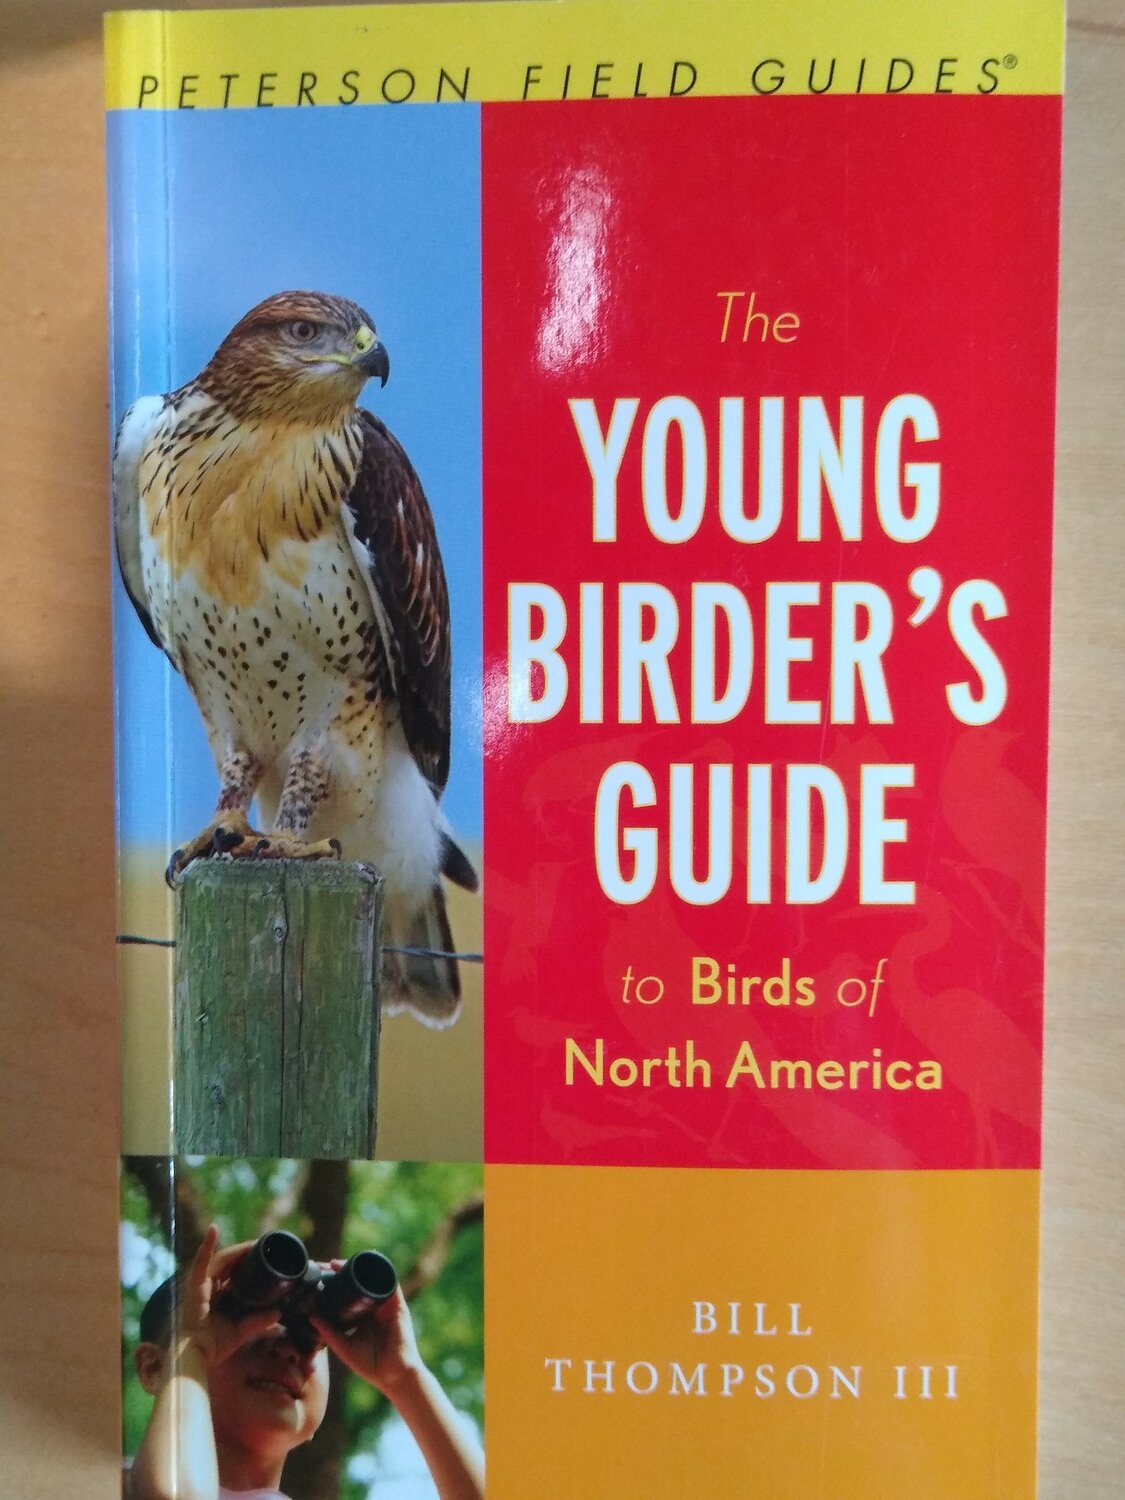 A favorite bird guide for youth.